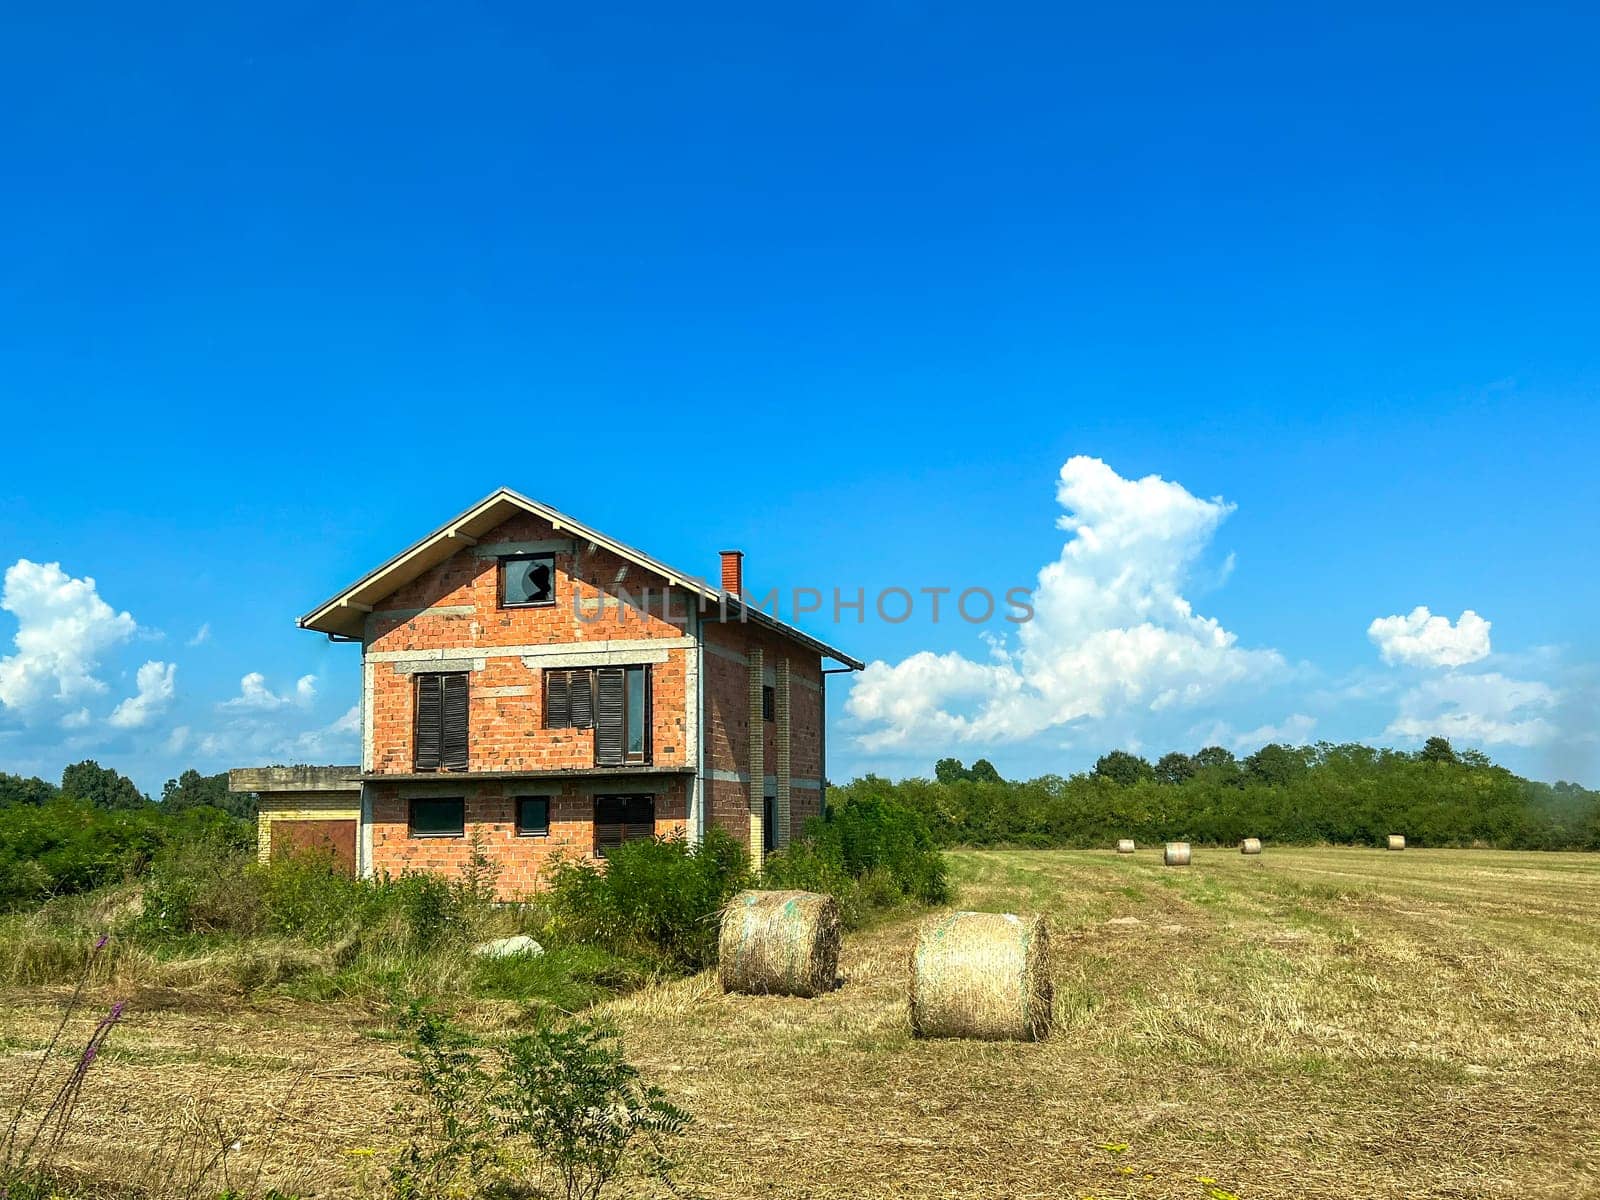 A non finished countryside house in Bosnia by stan111